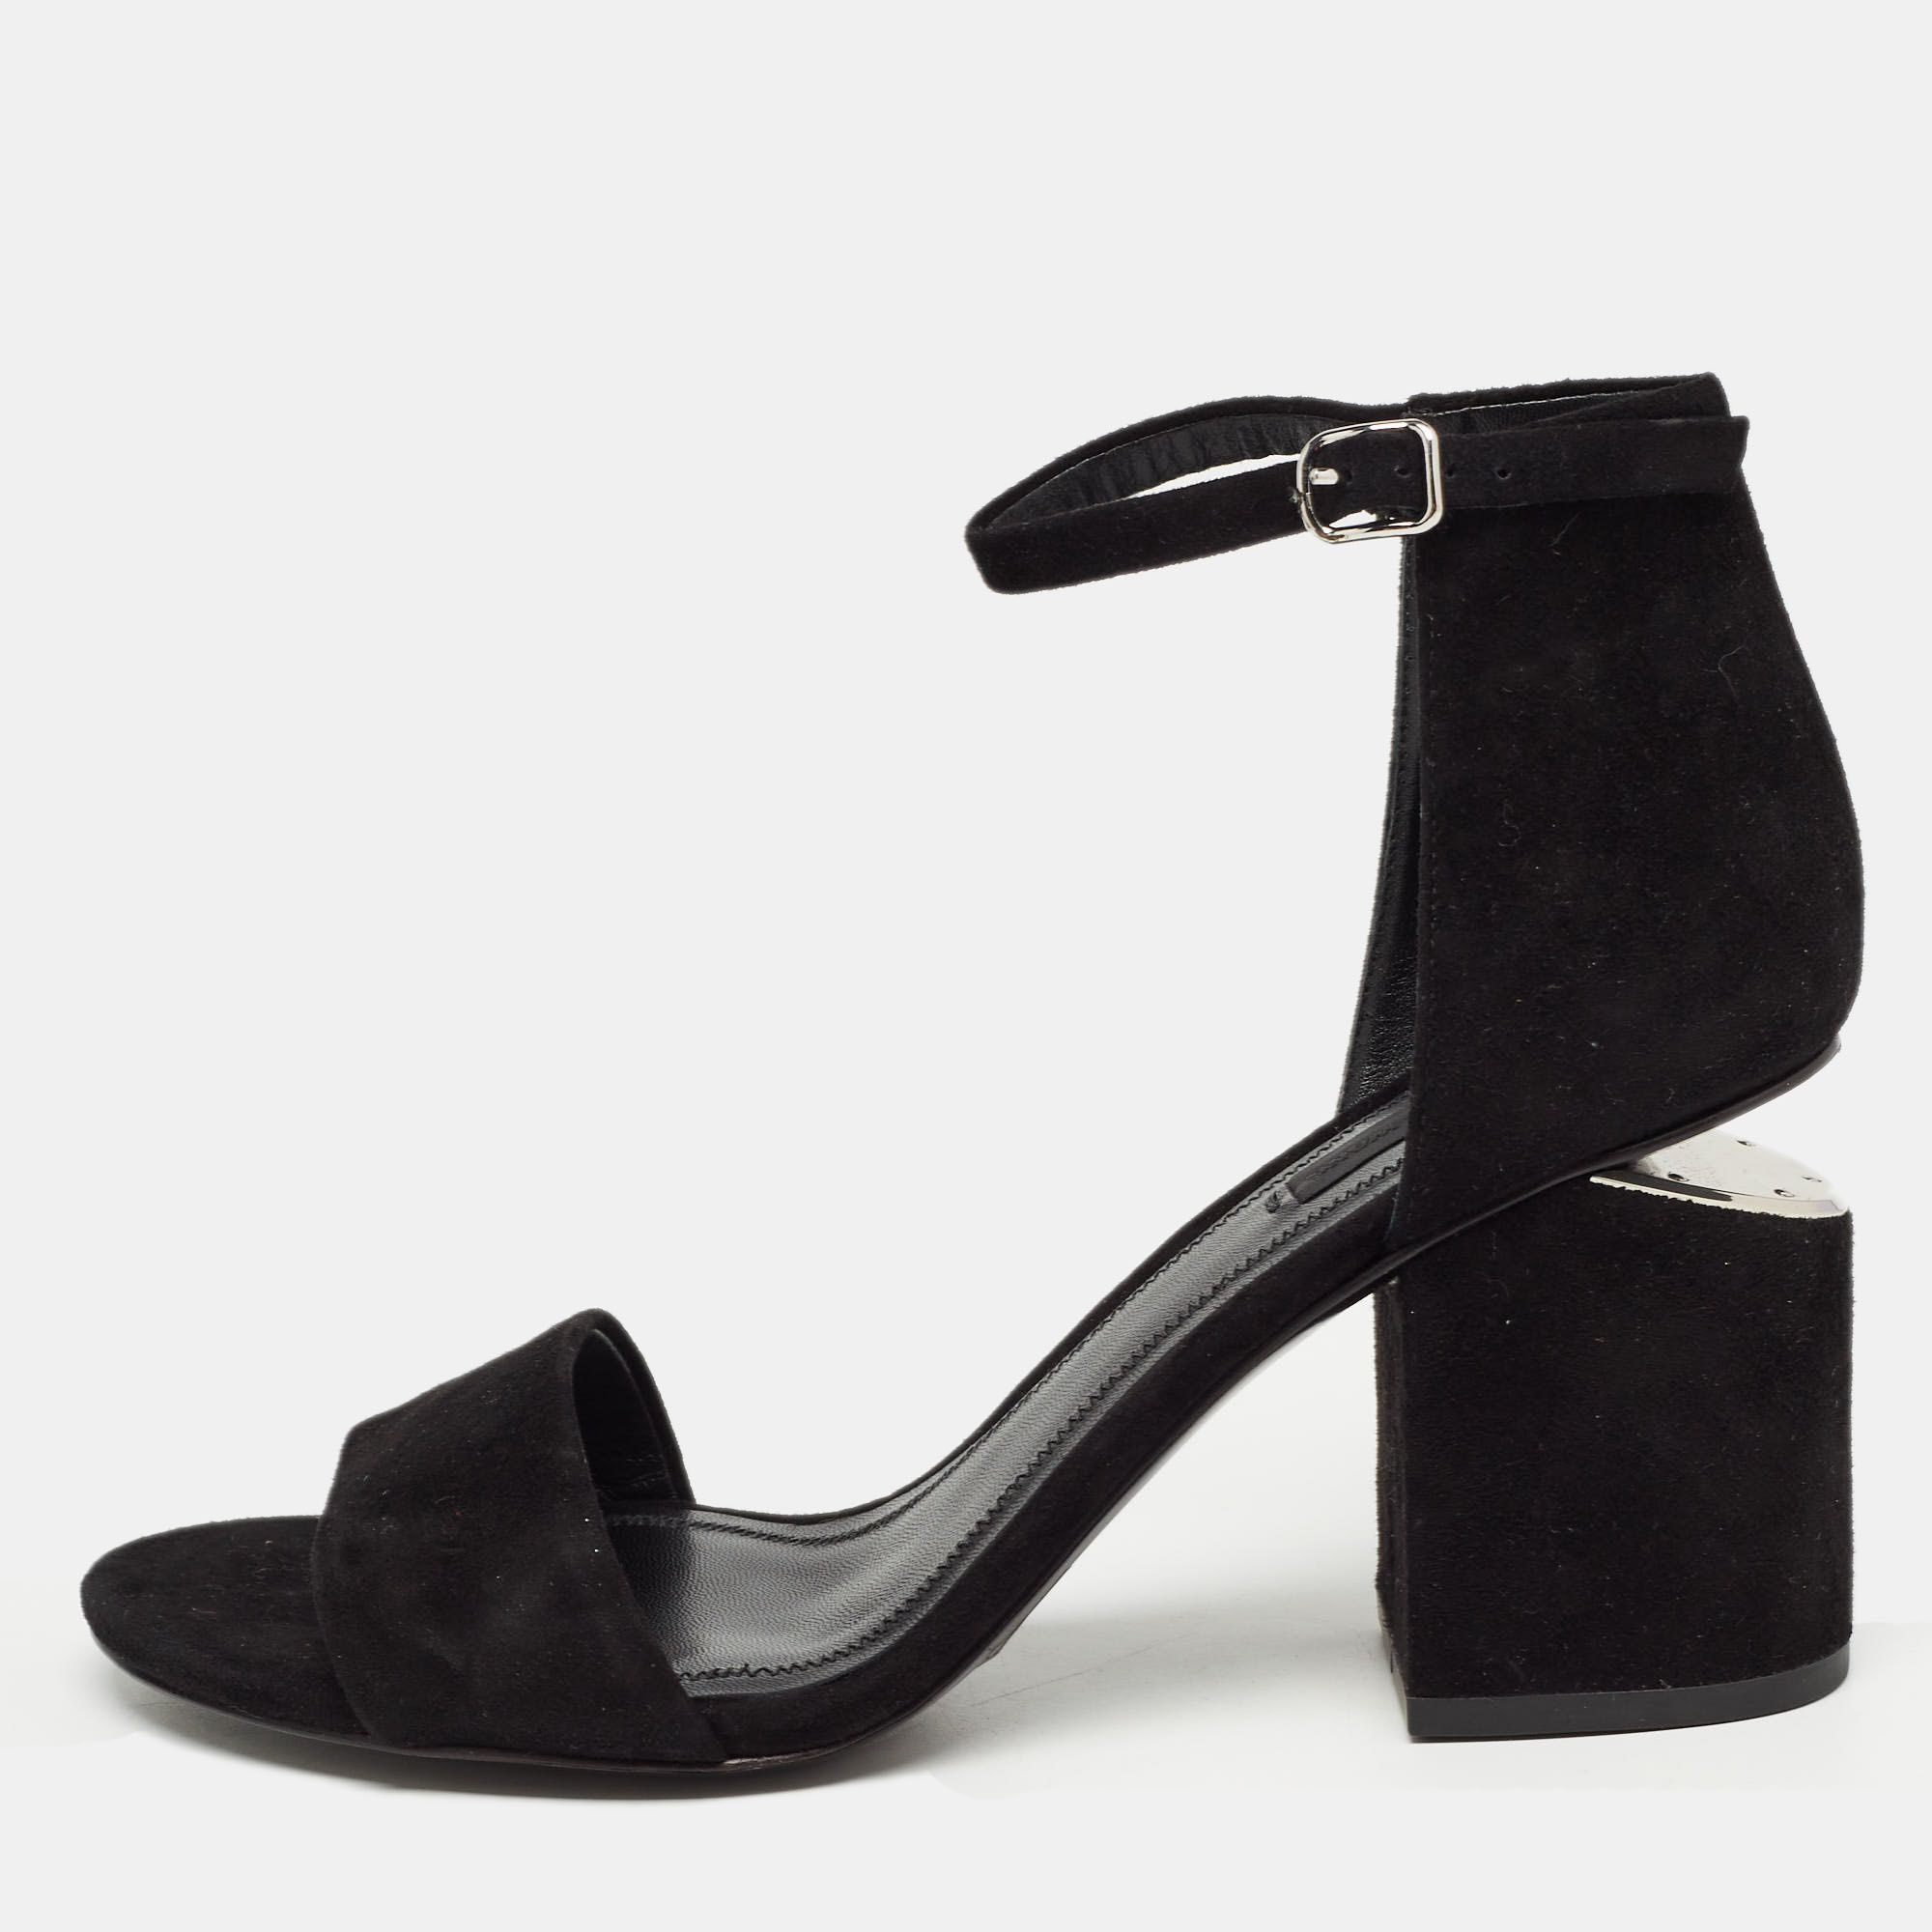 Alexander wang black suede abby  sandals size 39